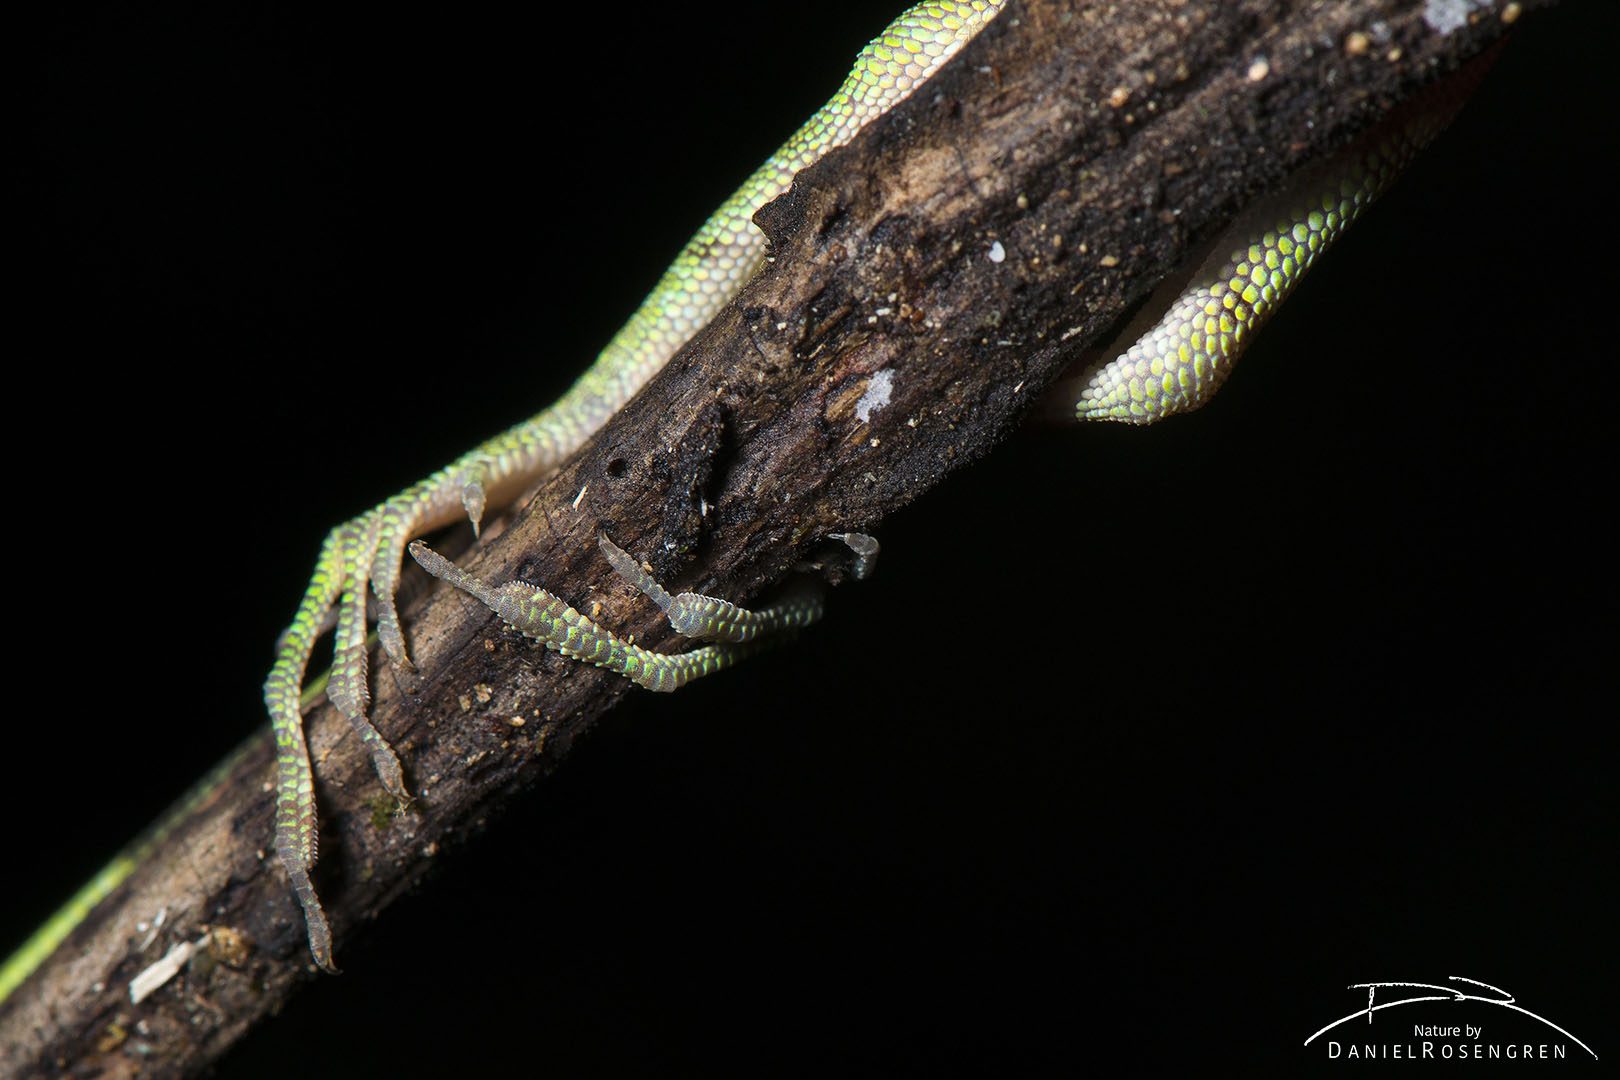 The hind legs of a Lizard holding on to a twig in Yaguas. © Daniel Rosengren